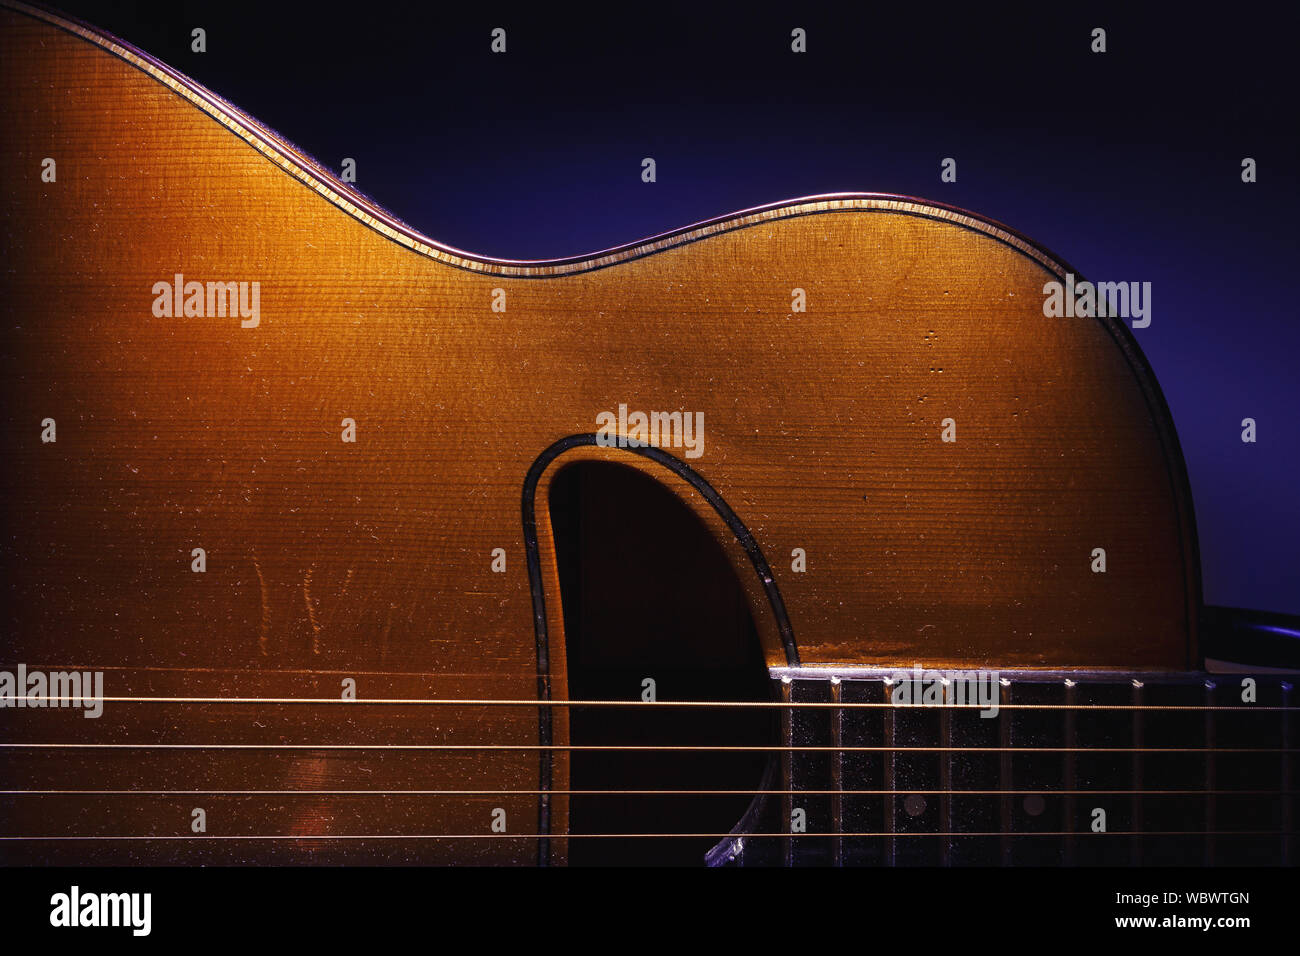 Details of an old and dusty gypsy jazz acoustic guitar, Django style. Stock Photo